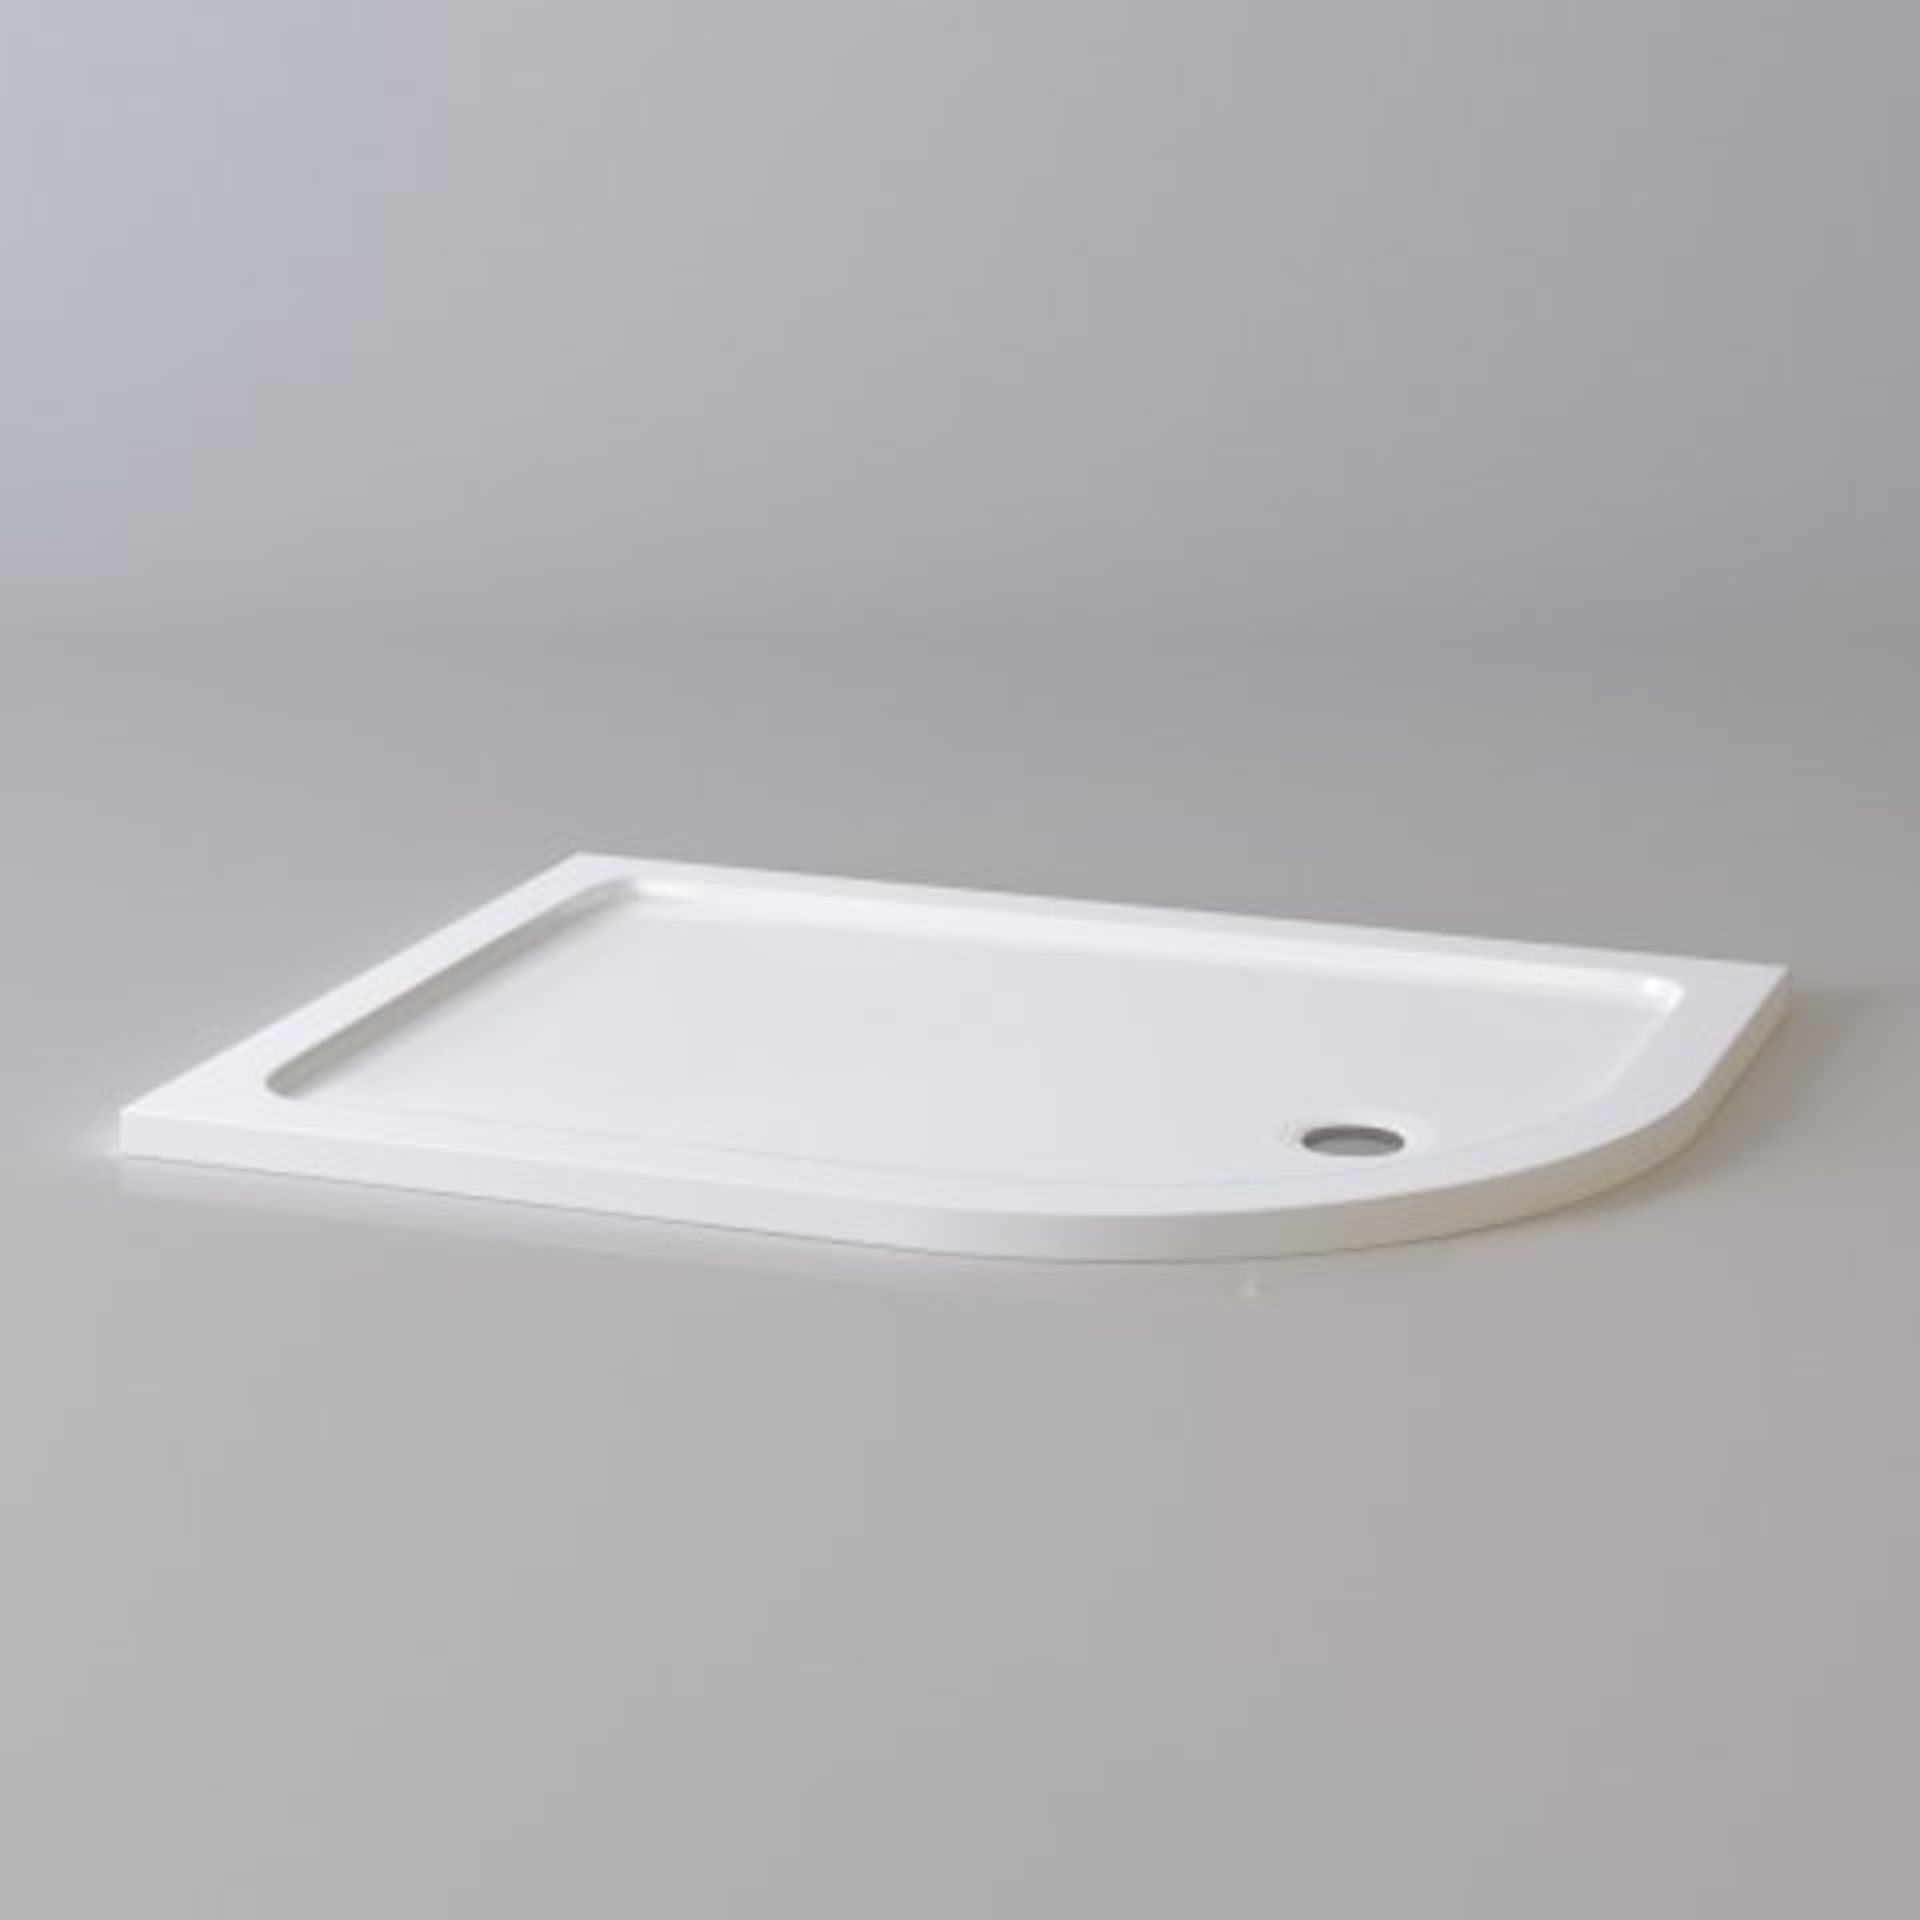 (O208) 1200x900mm Offset Quadrant Ultraslim Stone Shower Tray - Right. RRP £324.99. Magnificently